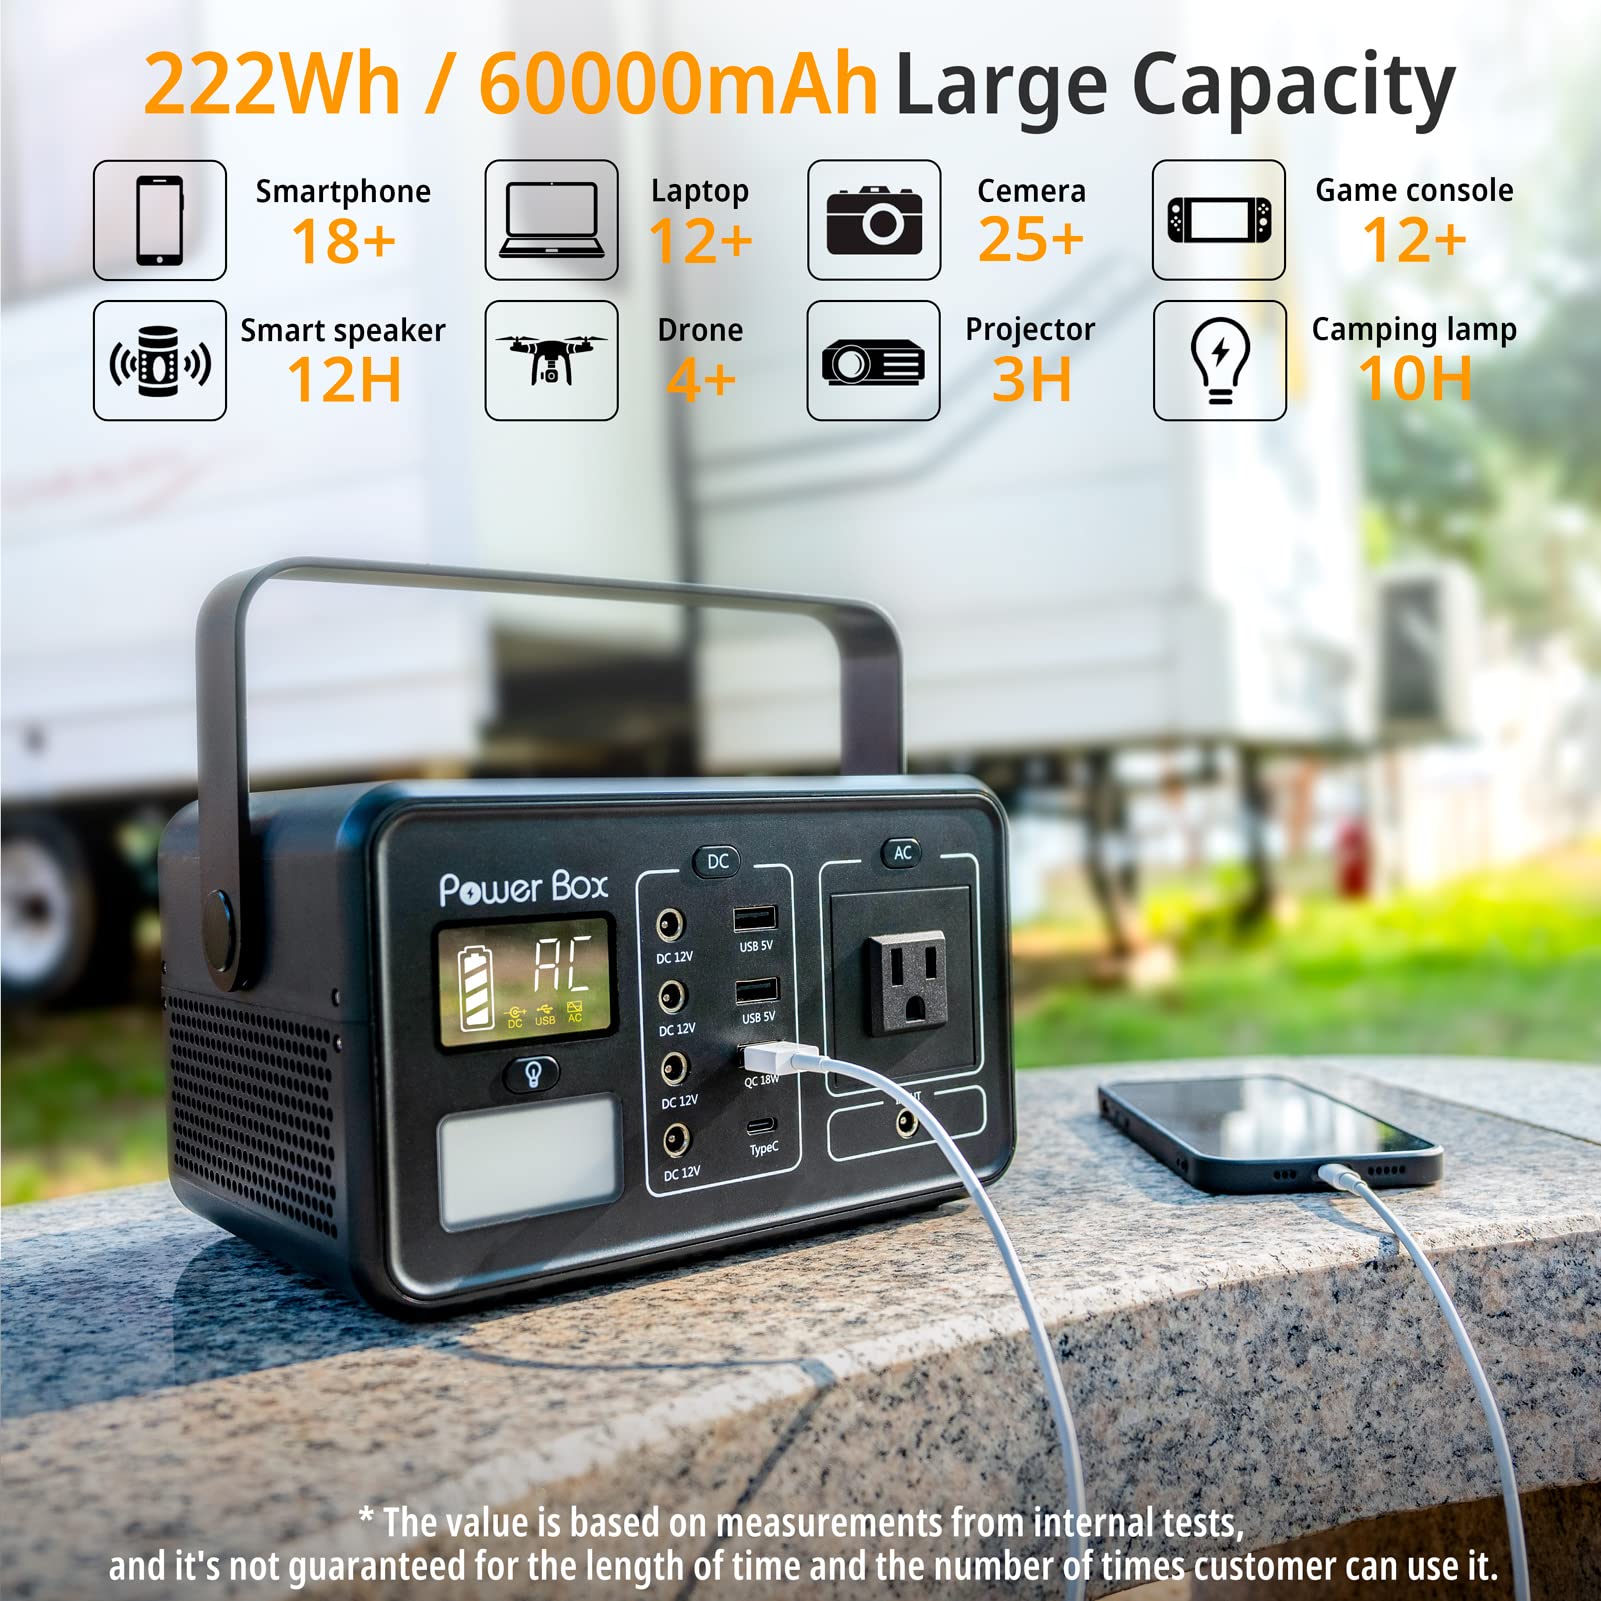 Portable Power Station,ROADOM 222Wh/60000mAh Solar Generator,110V/200W Pure Sine Wave AC Outlet,Lithium-Ion Battery Packs for Outdoor Camping Travel Road Trip Hunting Emergency Home Backup